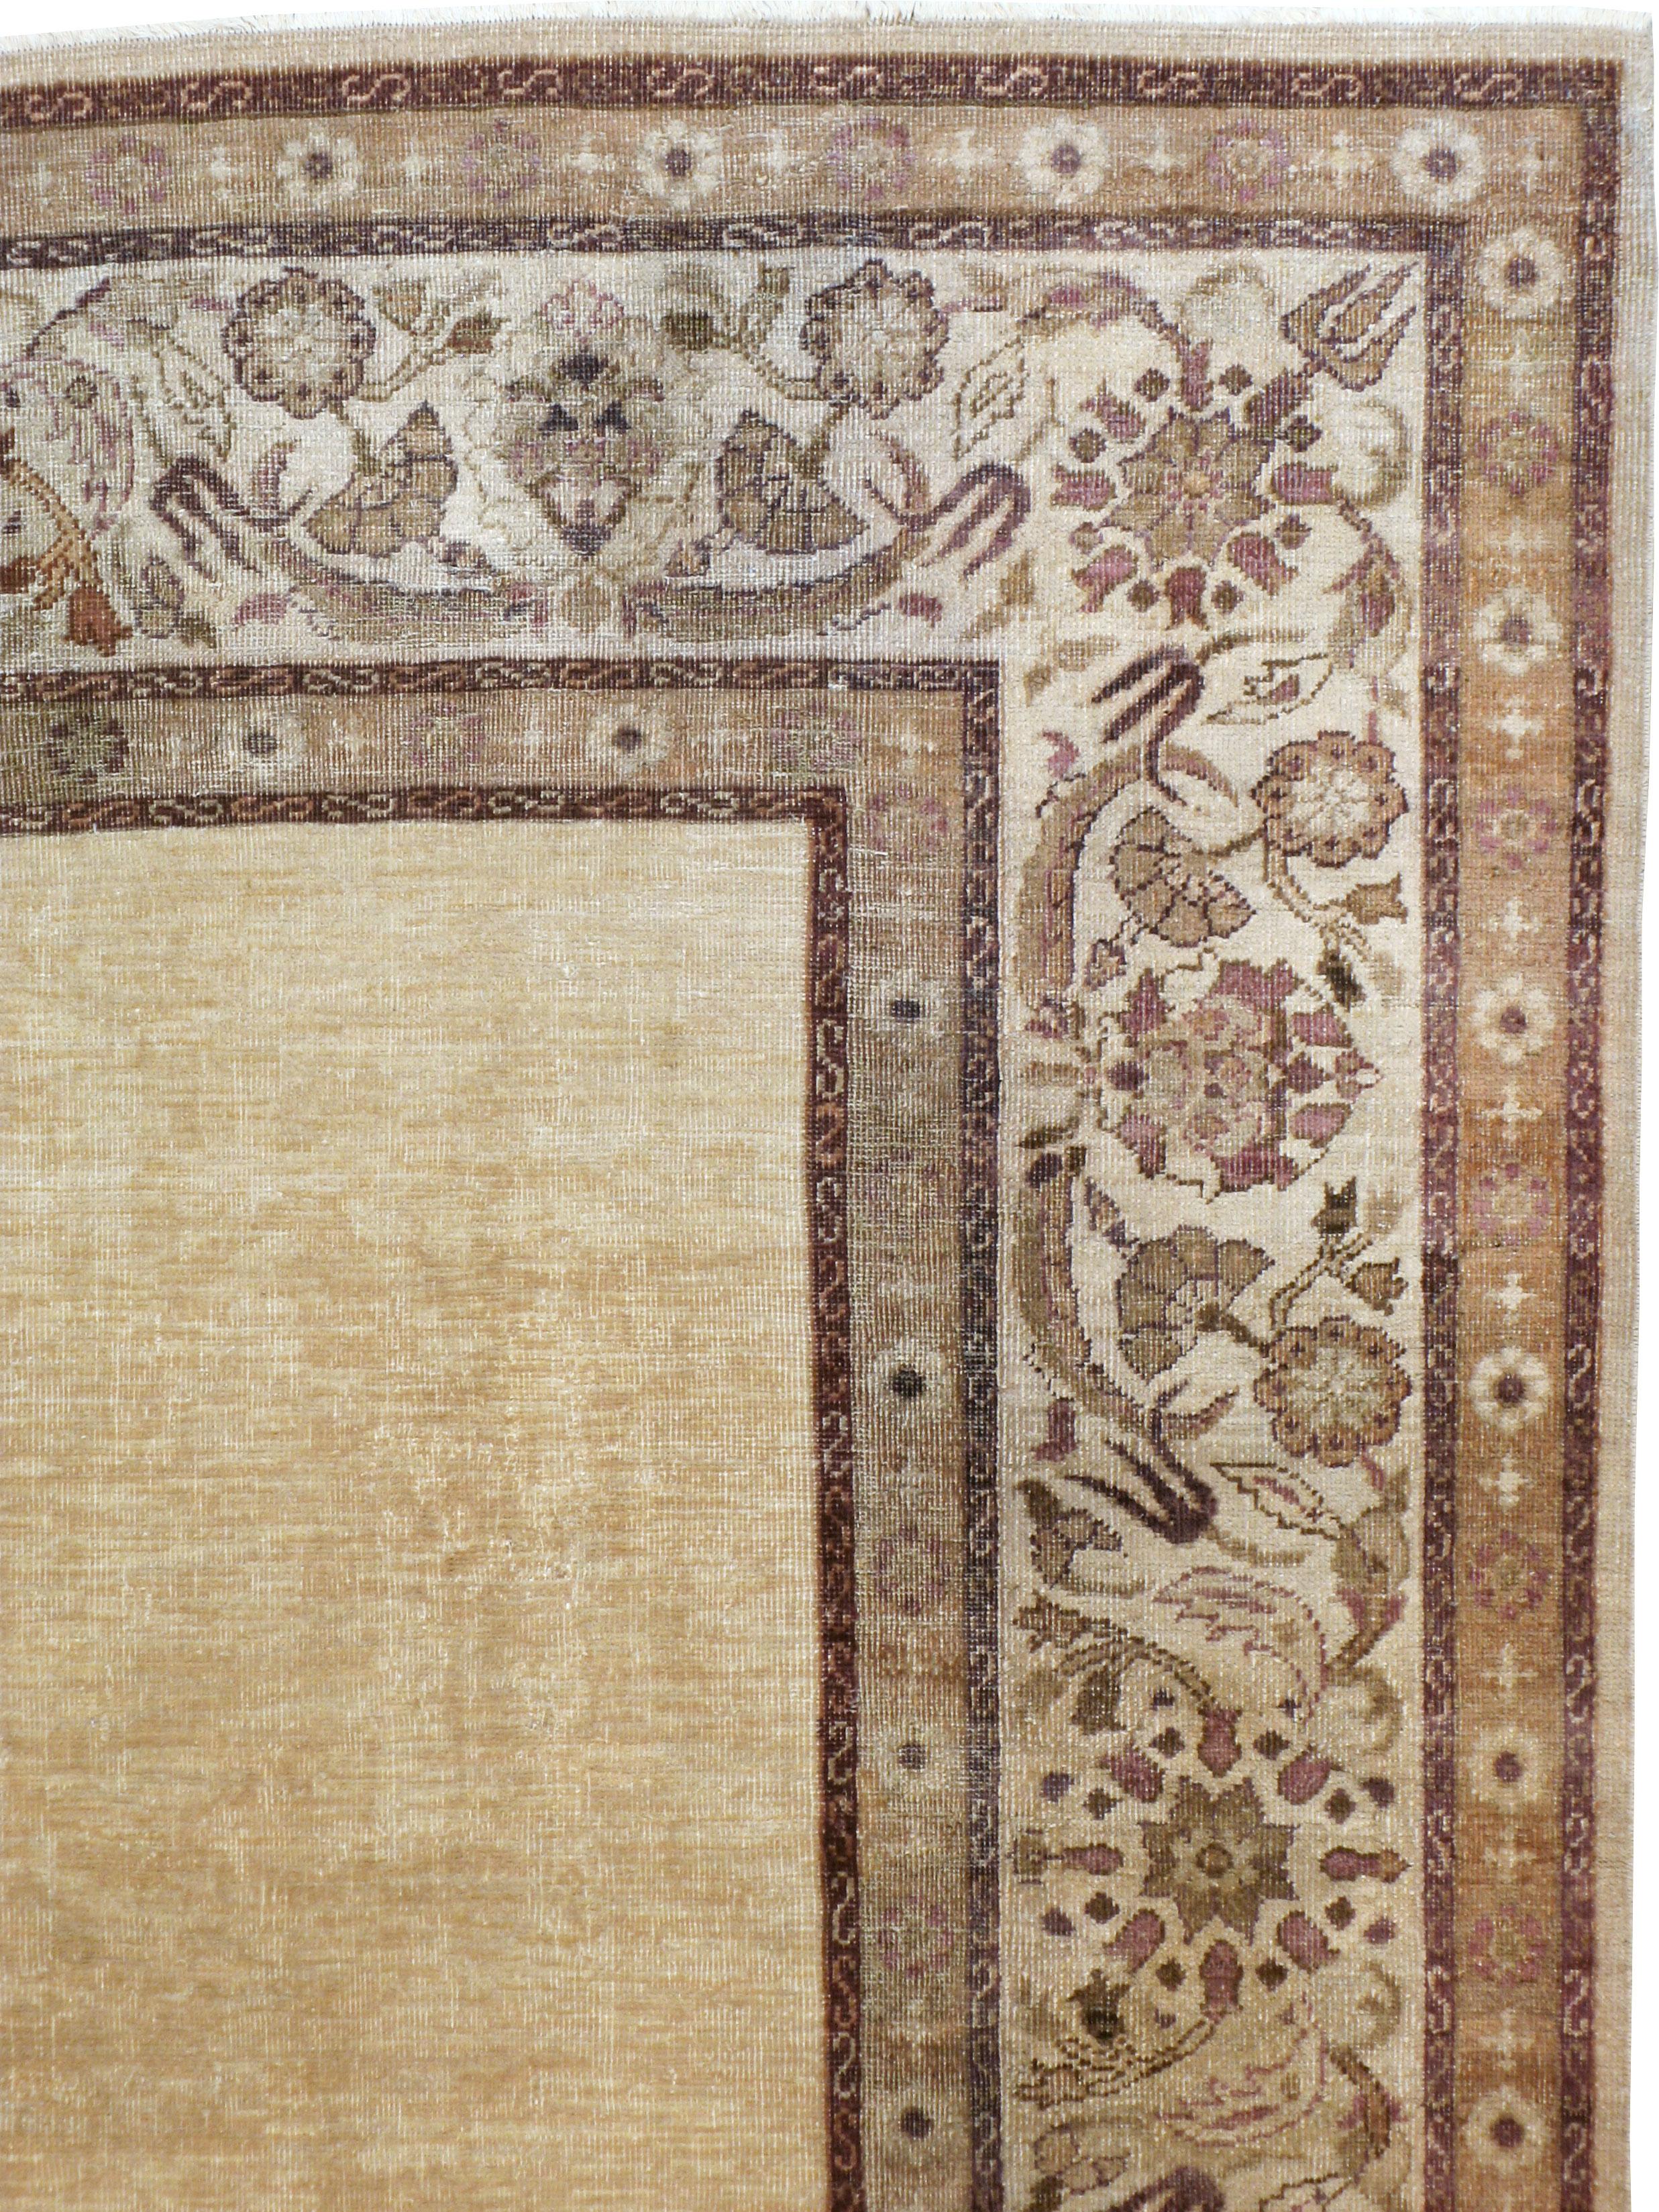 Hand-Knotted Antique Indian Agra Carpet